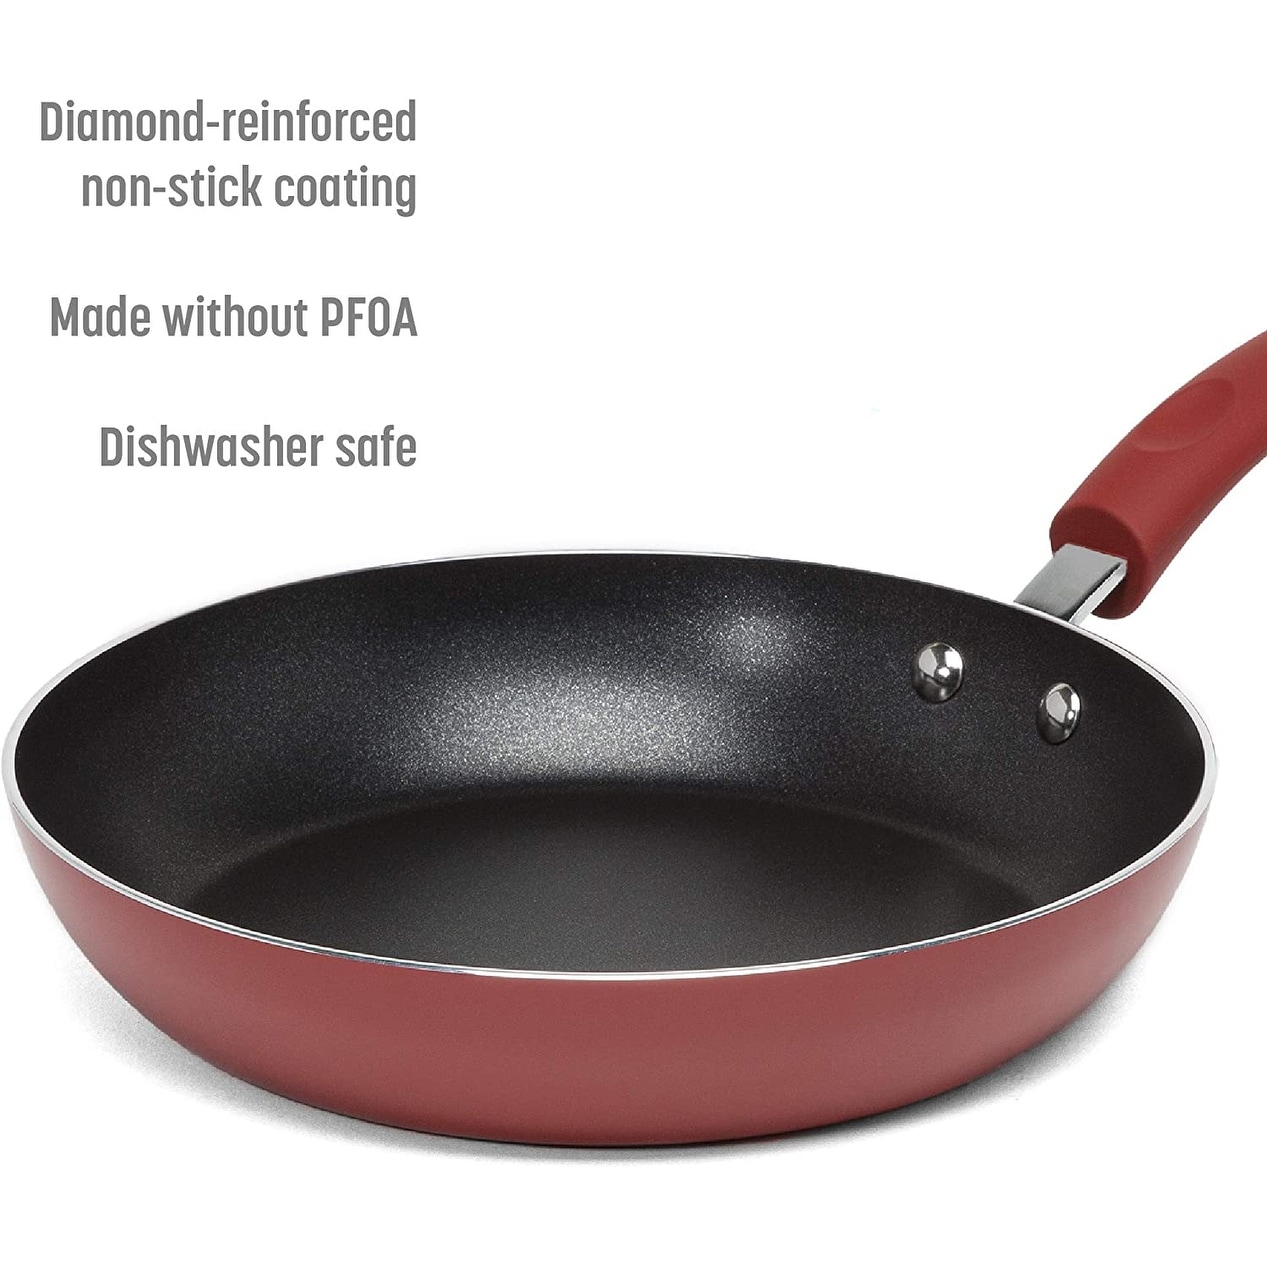 Goodful Cookware Set with Premium Non-Stick Coating,undefined